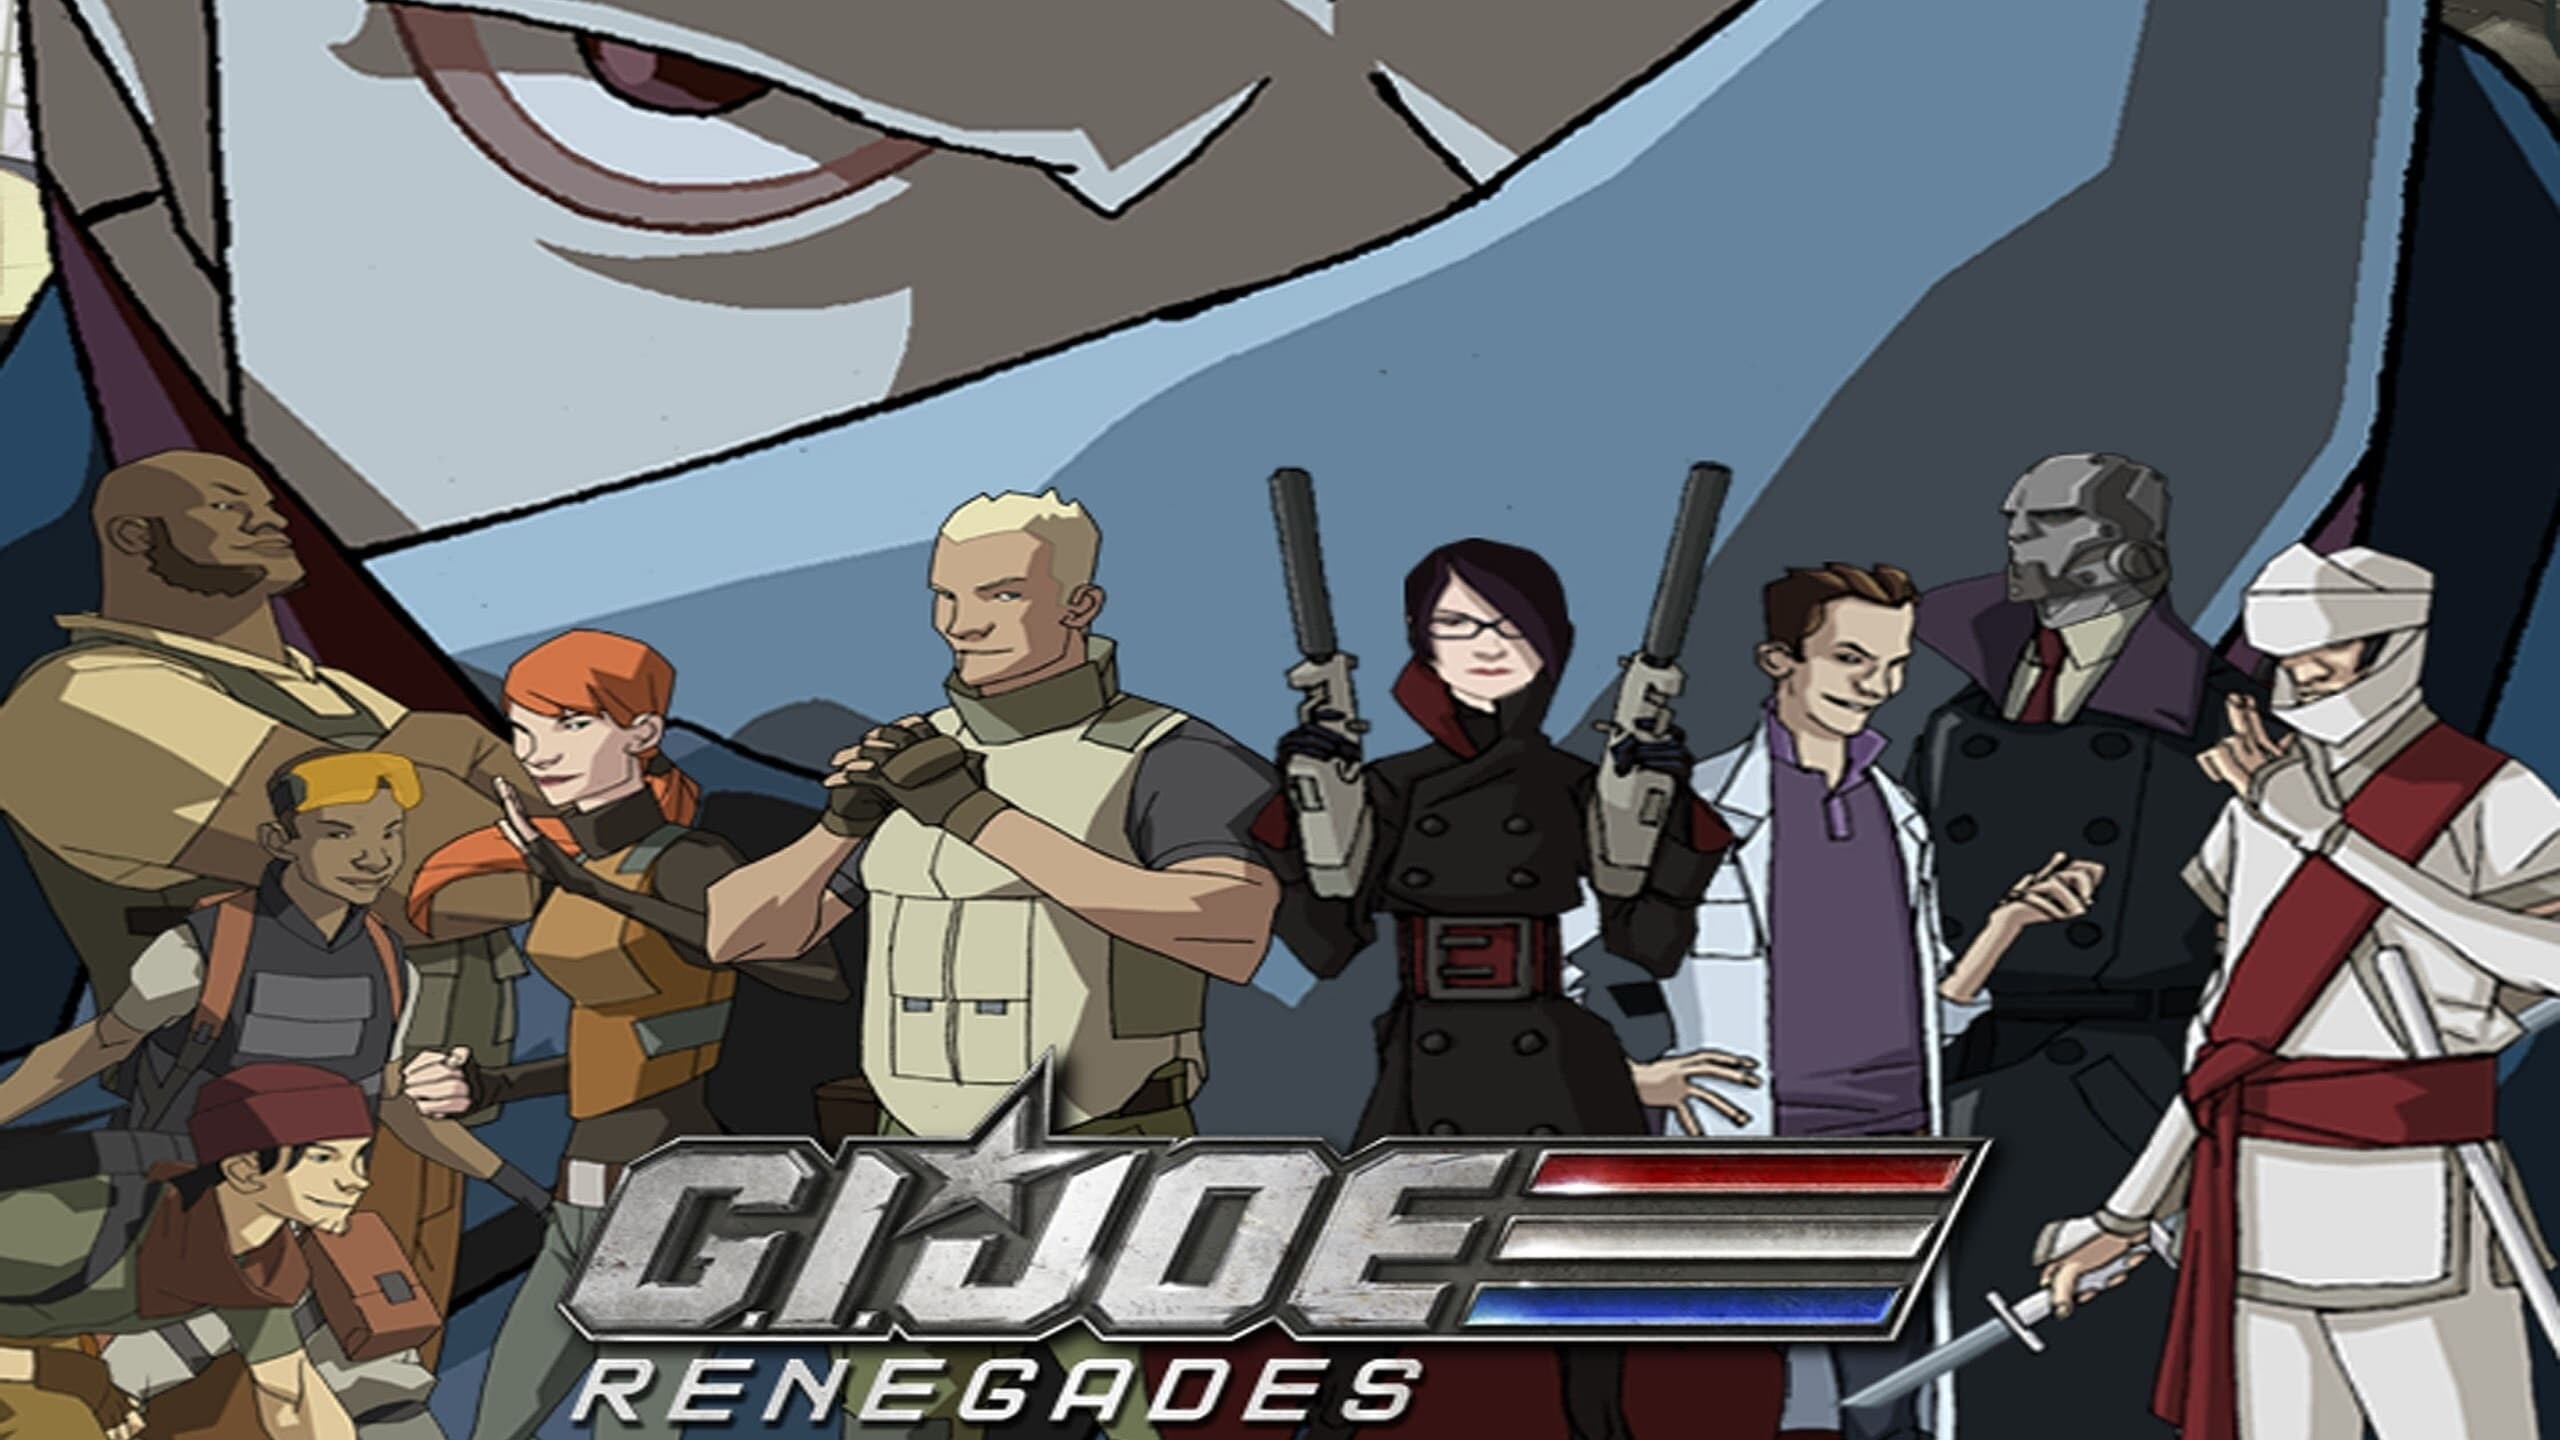 G.I. Joe (Cartoon): Renegades, An American Animated Television Series, Based On The Toy Franchise, 2010-2011. 2560x1440 HD Wallpaper.